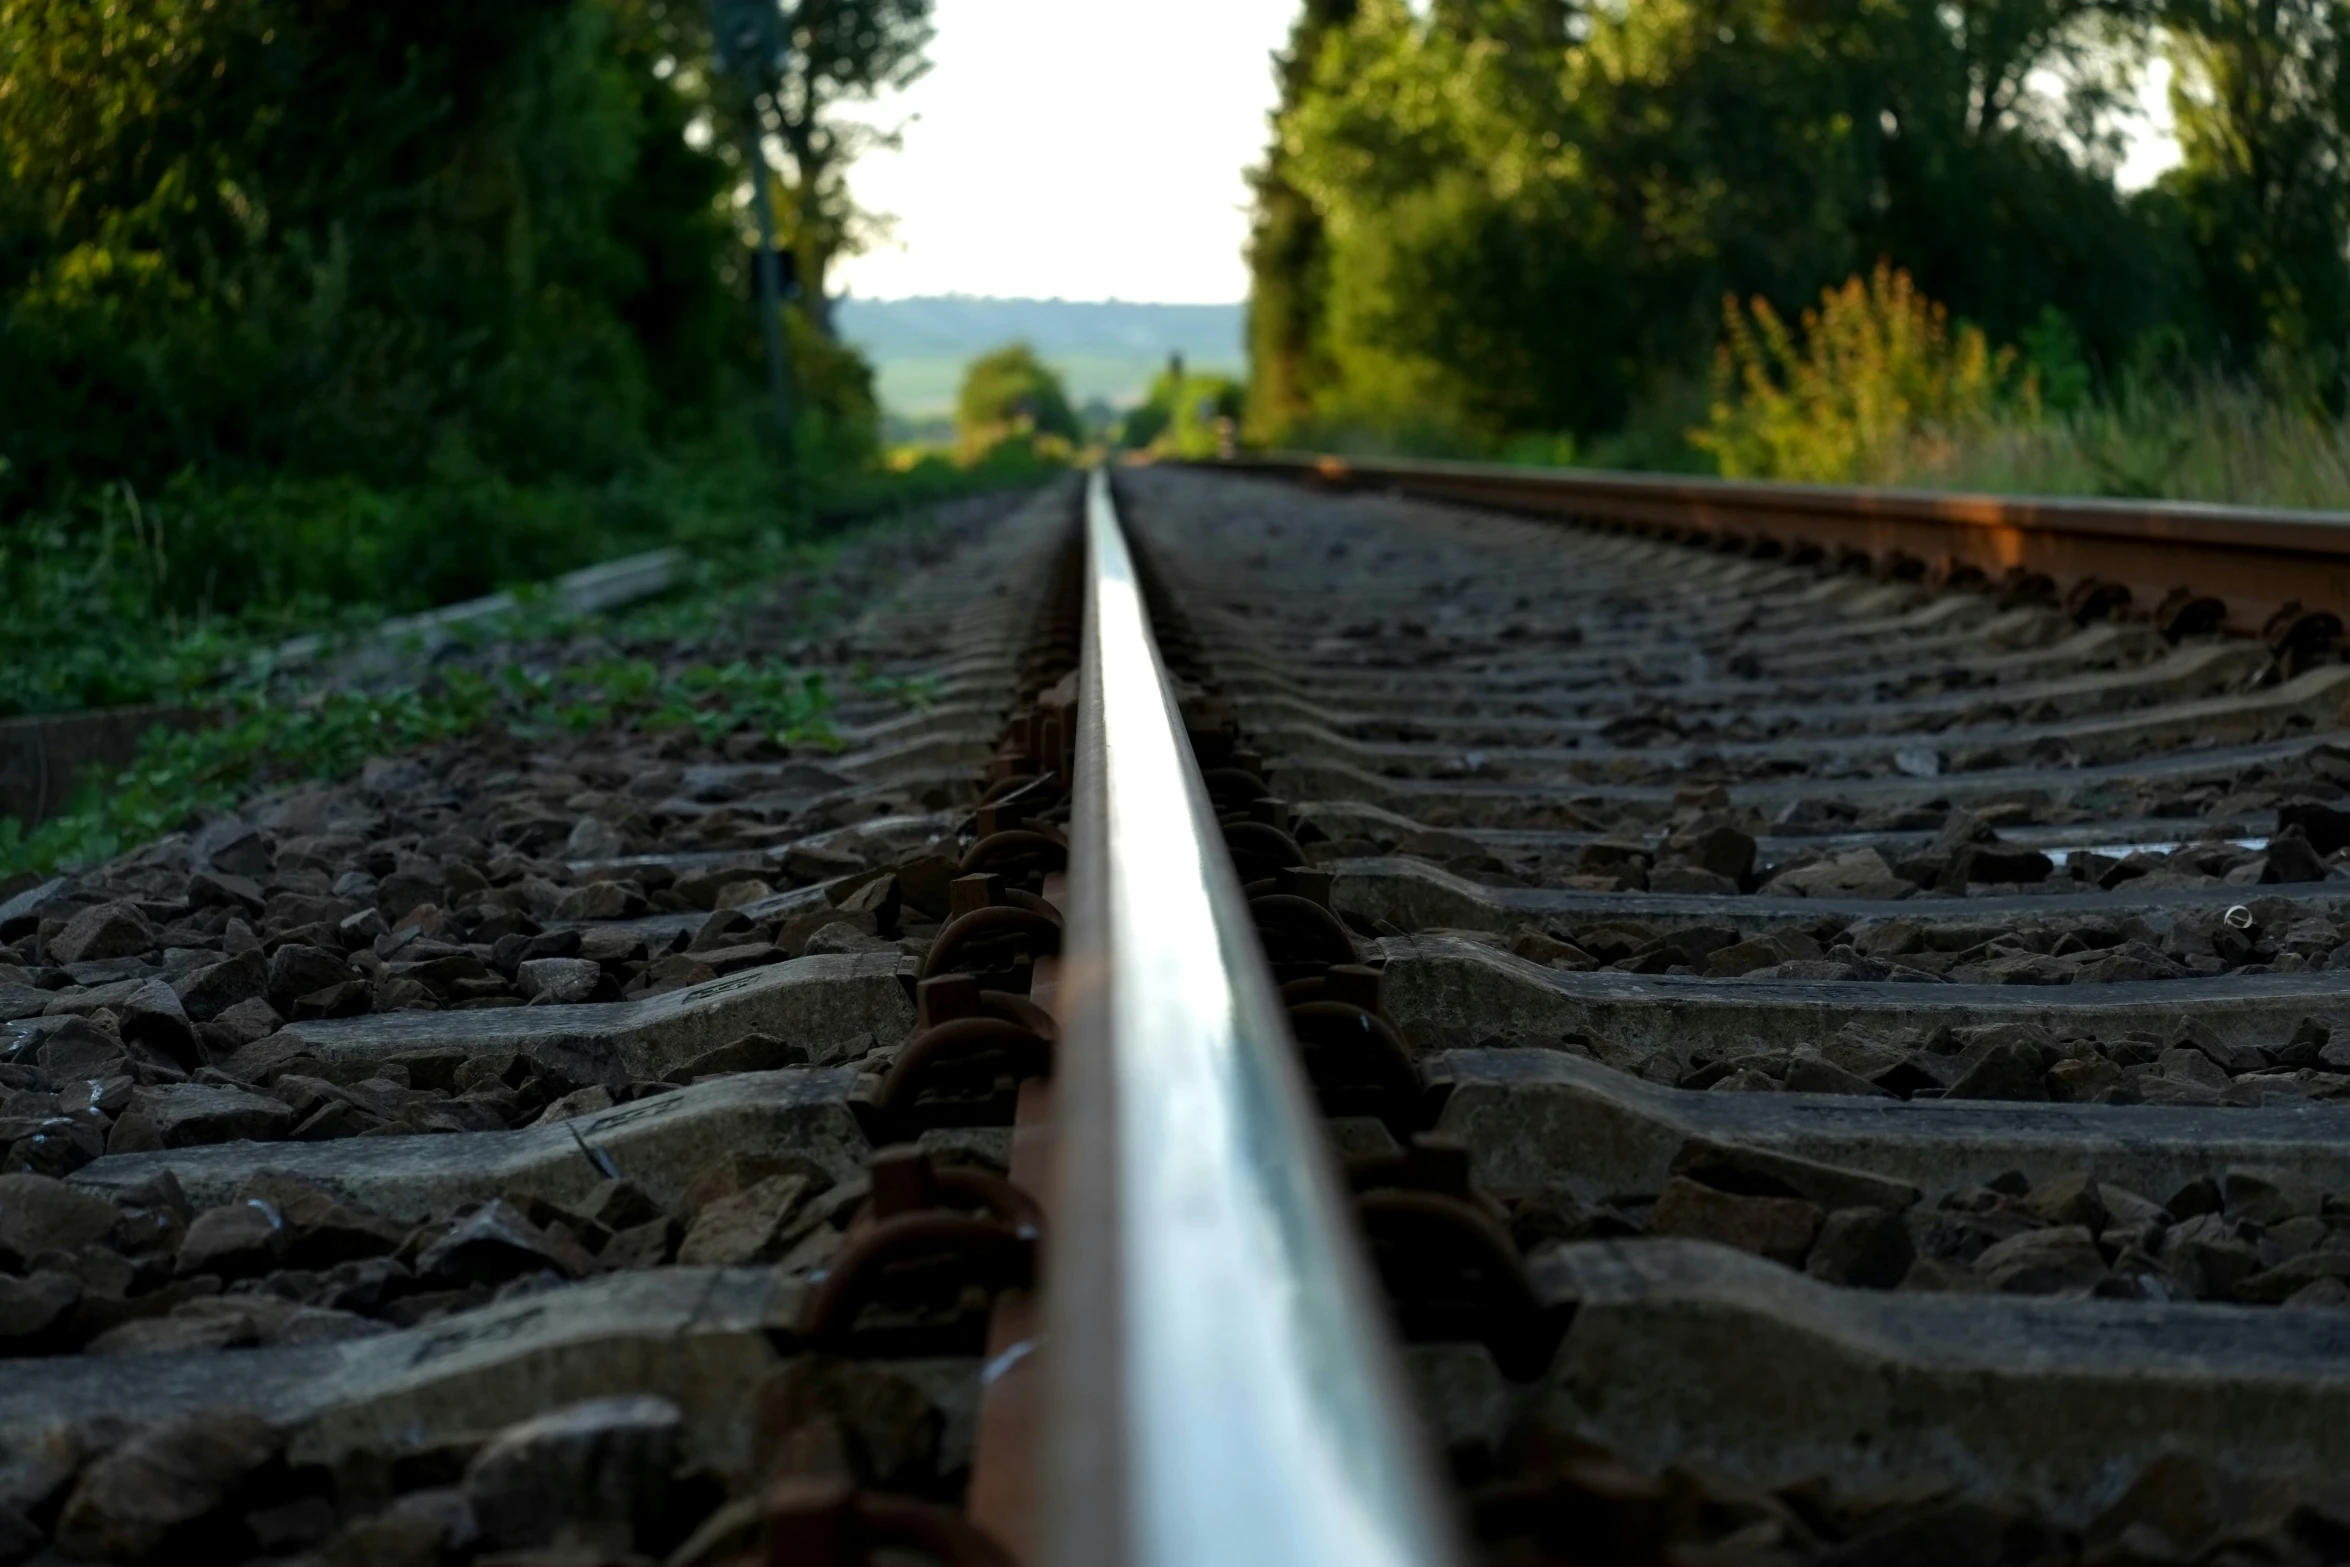 a close up of a train track with trees in the background, rule-of-thirds, profile picture 1024px, looking into the horizon, concise lines